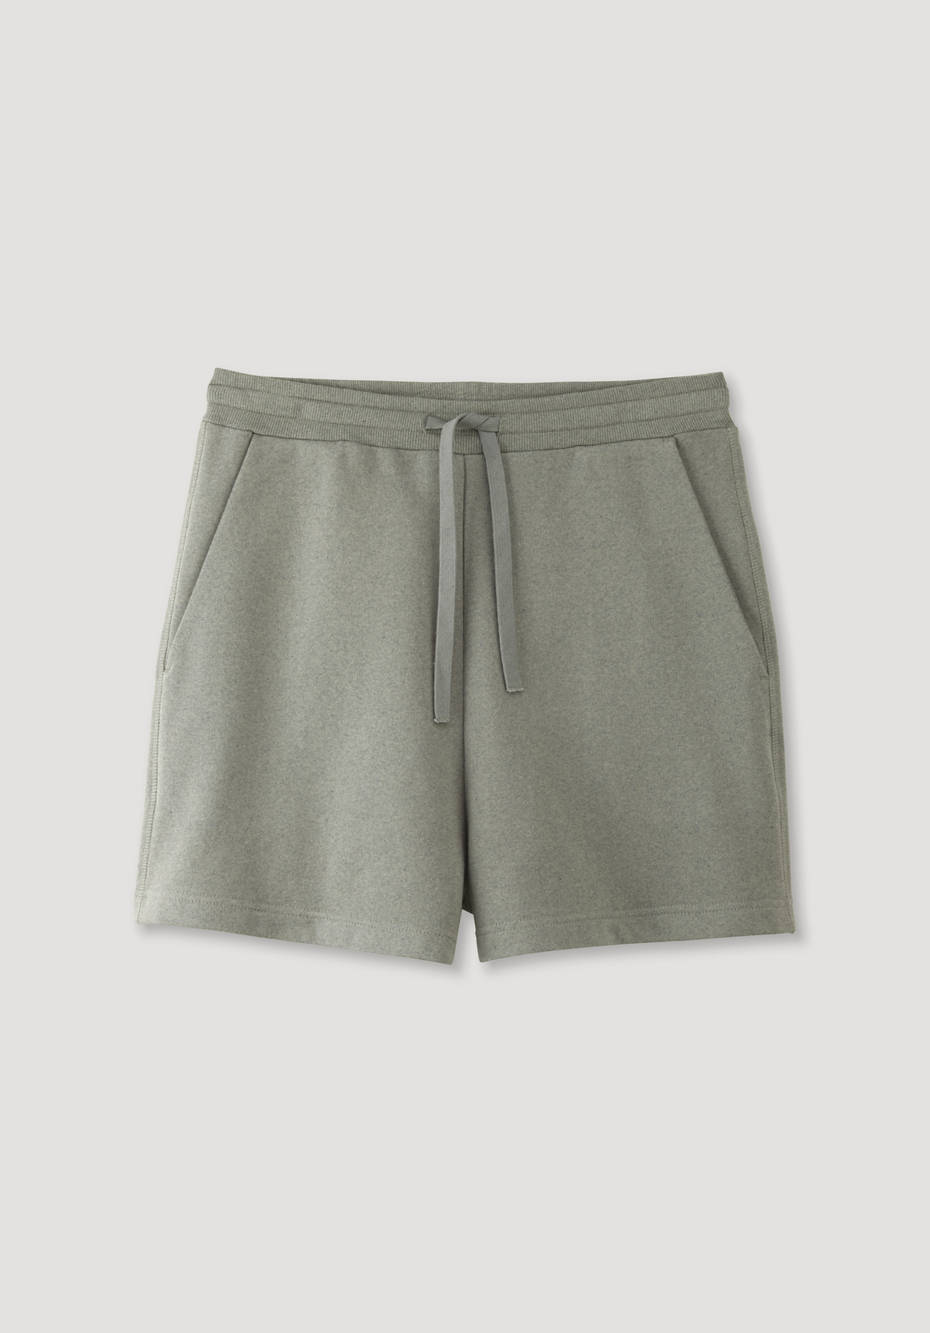 Sweat shorts made from pure organic cotton